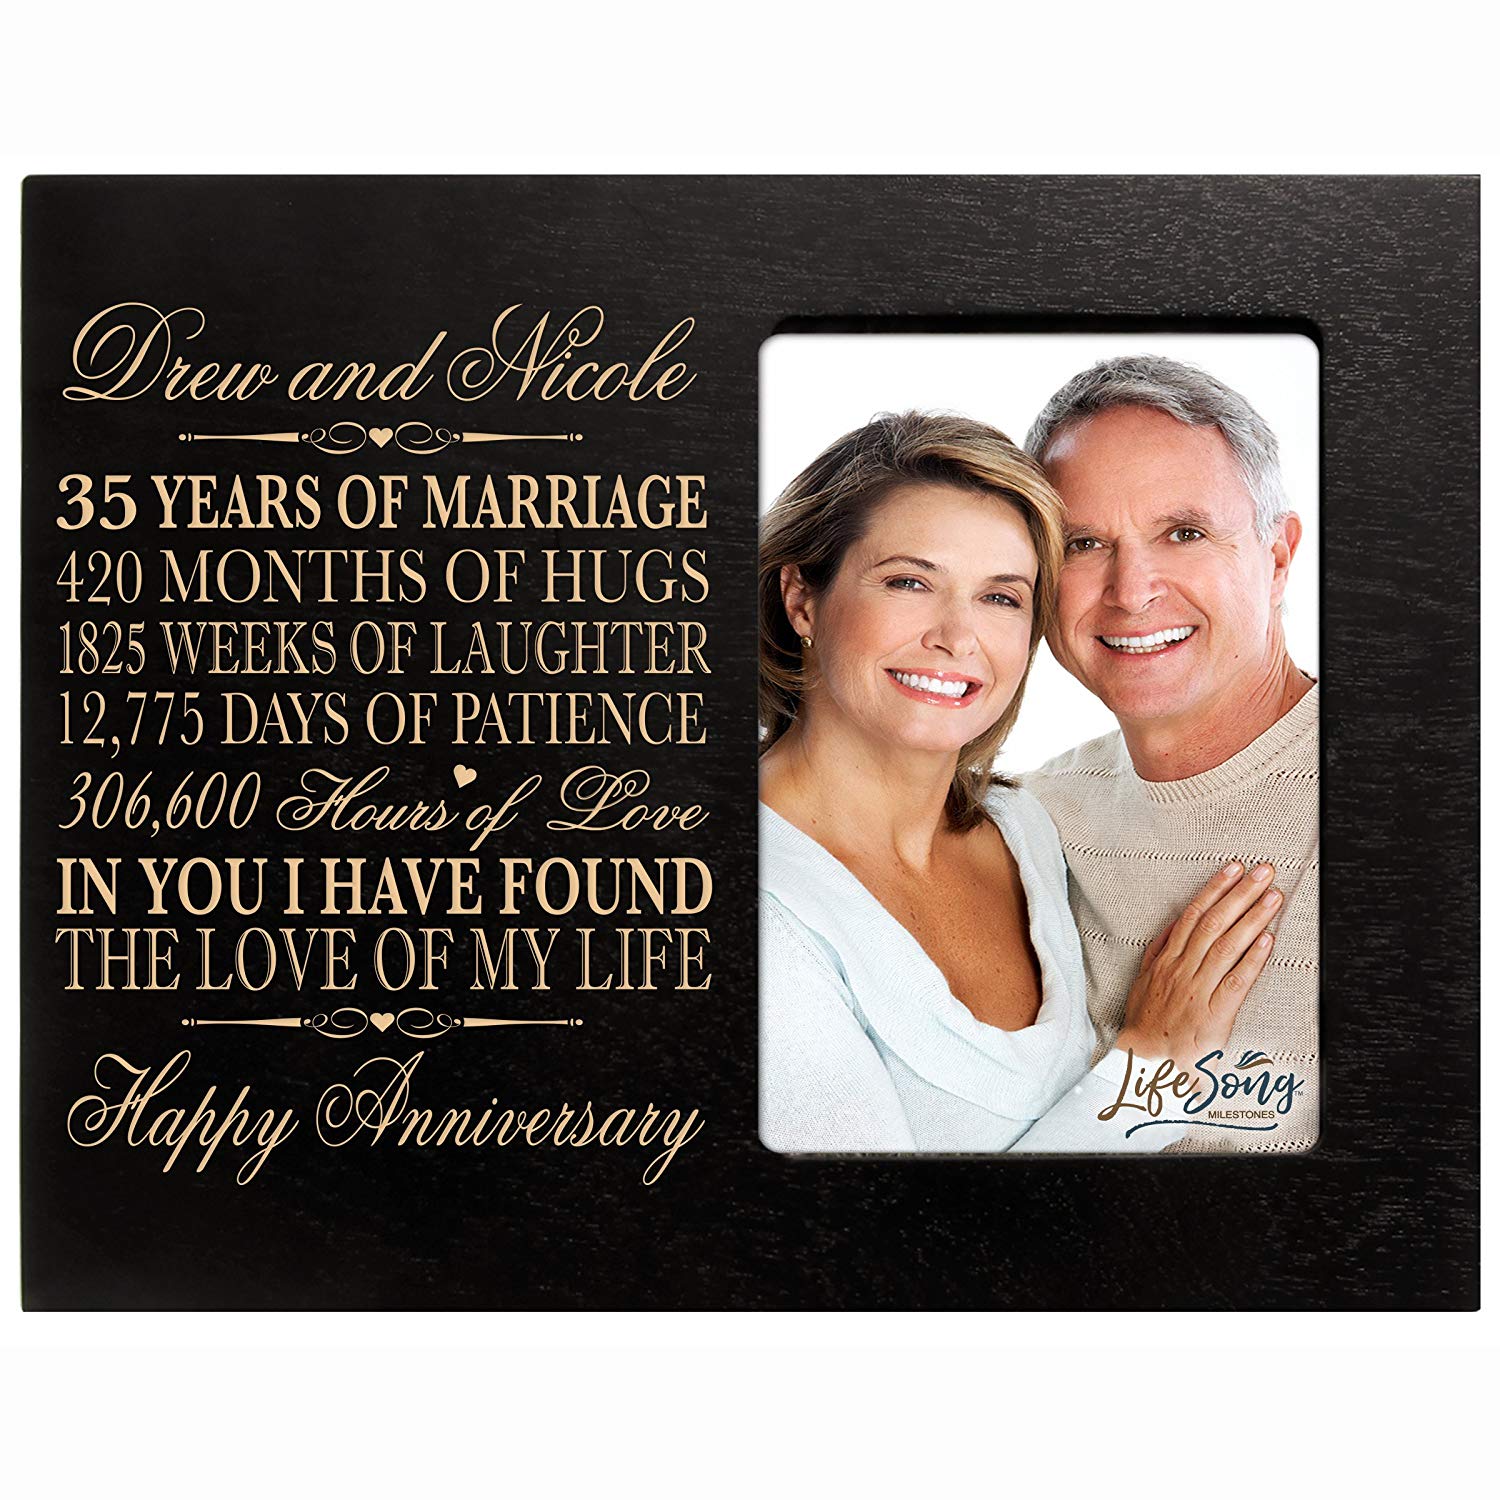 Personalized 35th Year Wedding Anniversary Photo Frame Gift for Couple - LifeSong Milestones